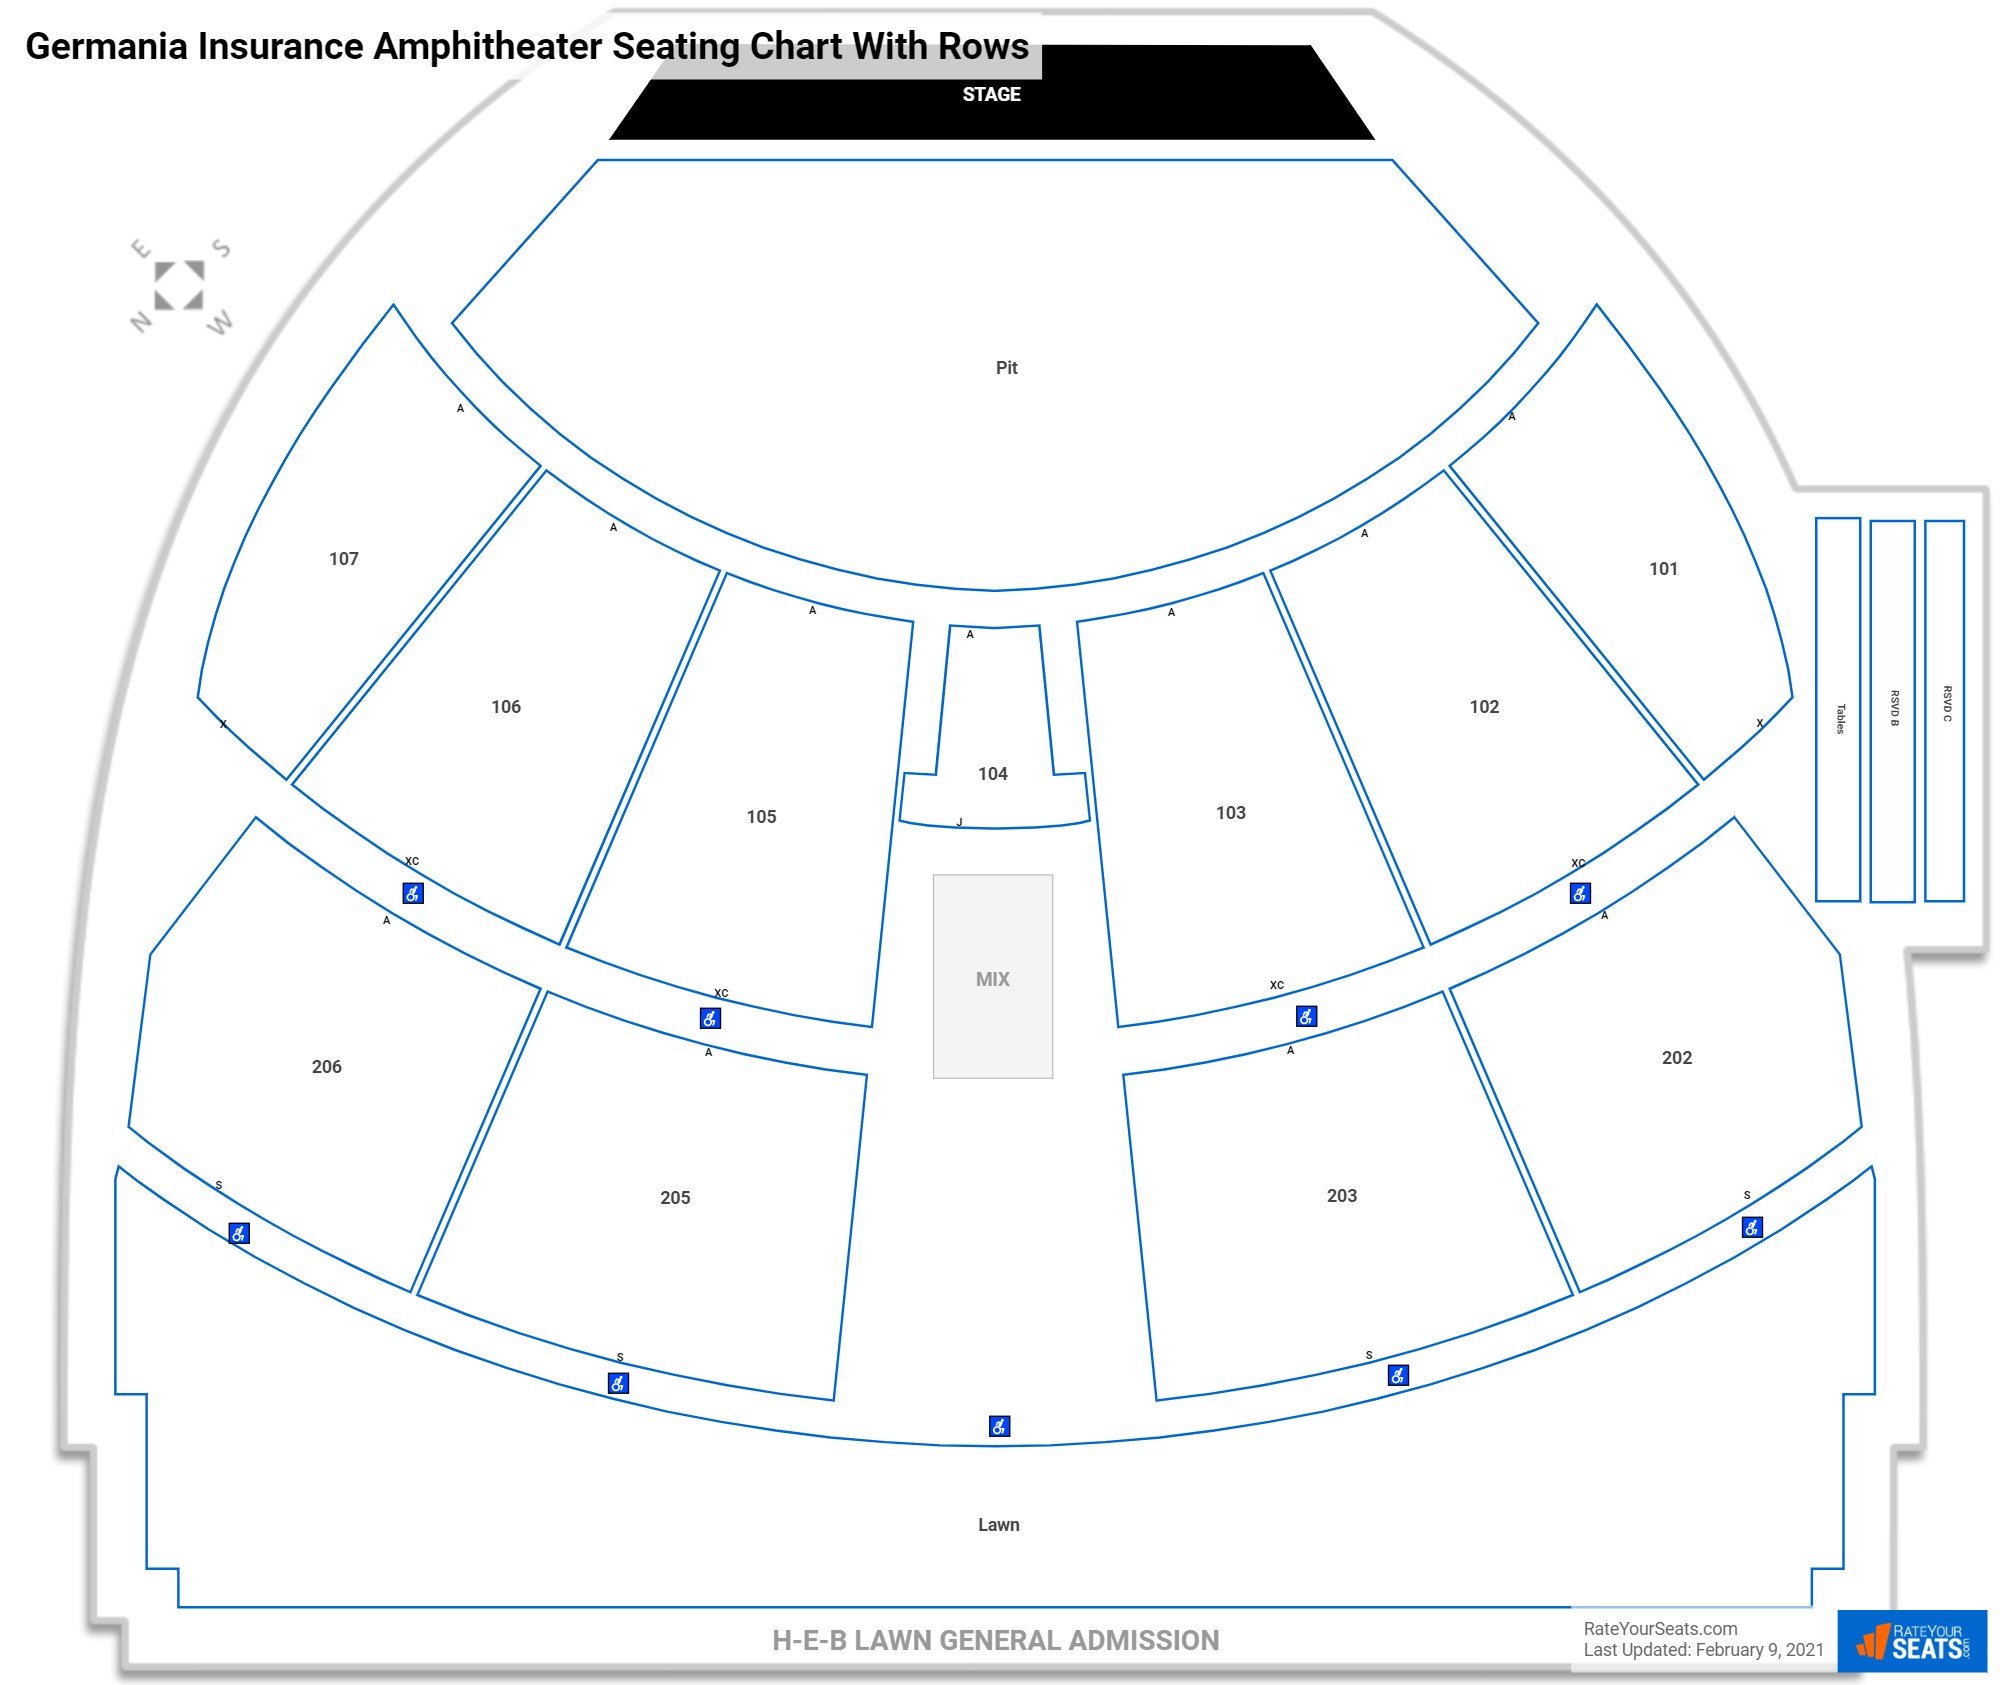 Germania Insurance Amphitheater seating chart with row numbers